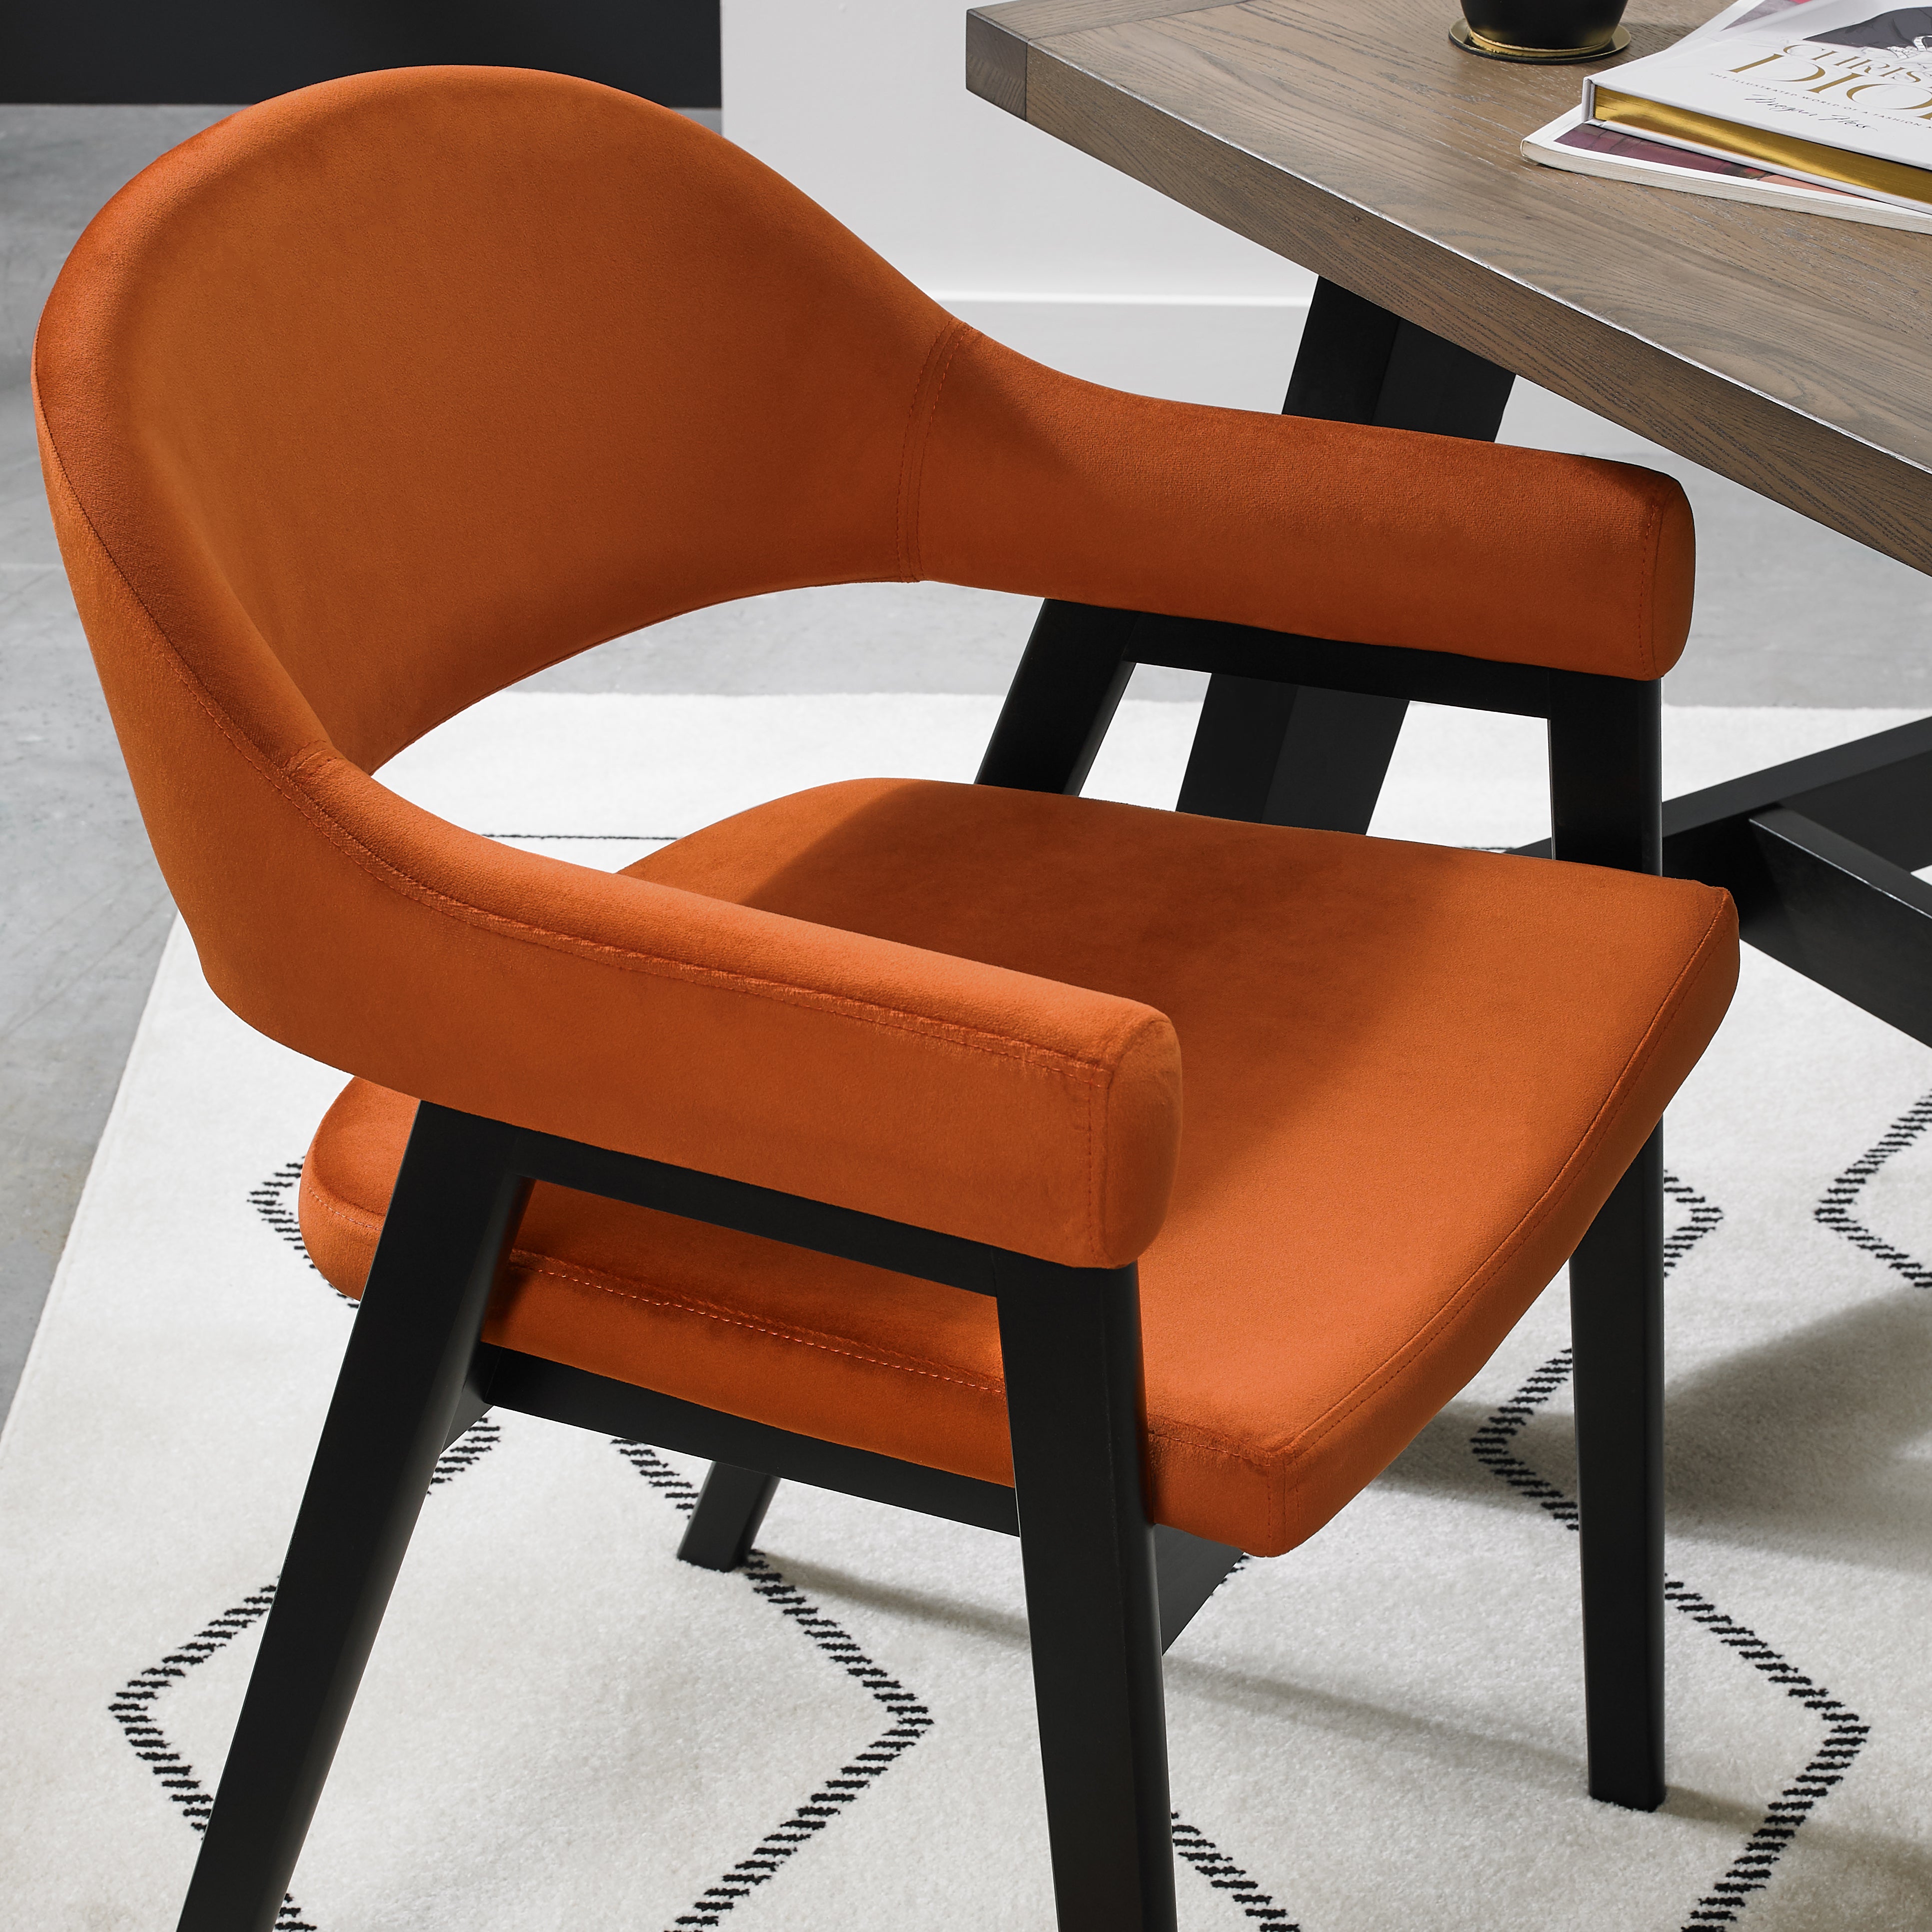 Candice Upholstered Dining Chair with Arms - Rust